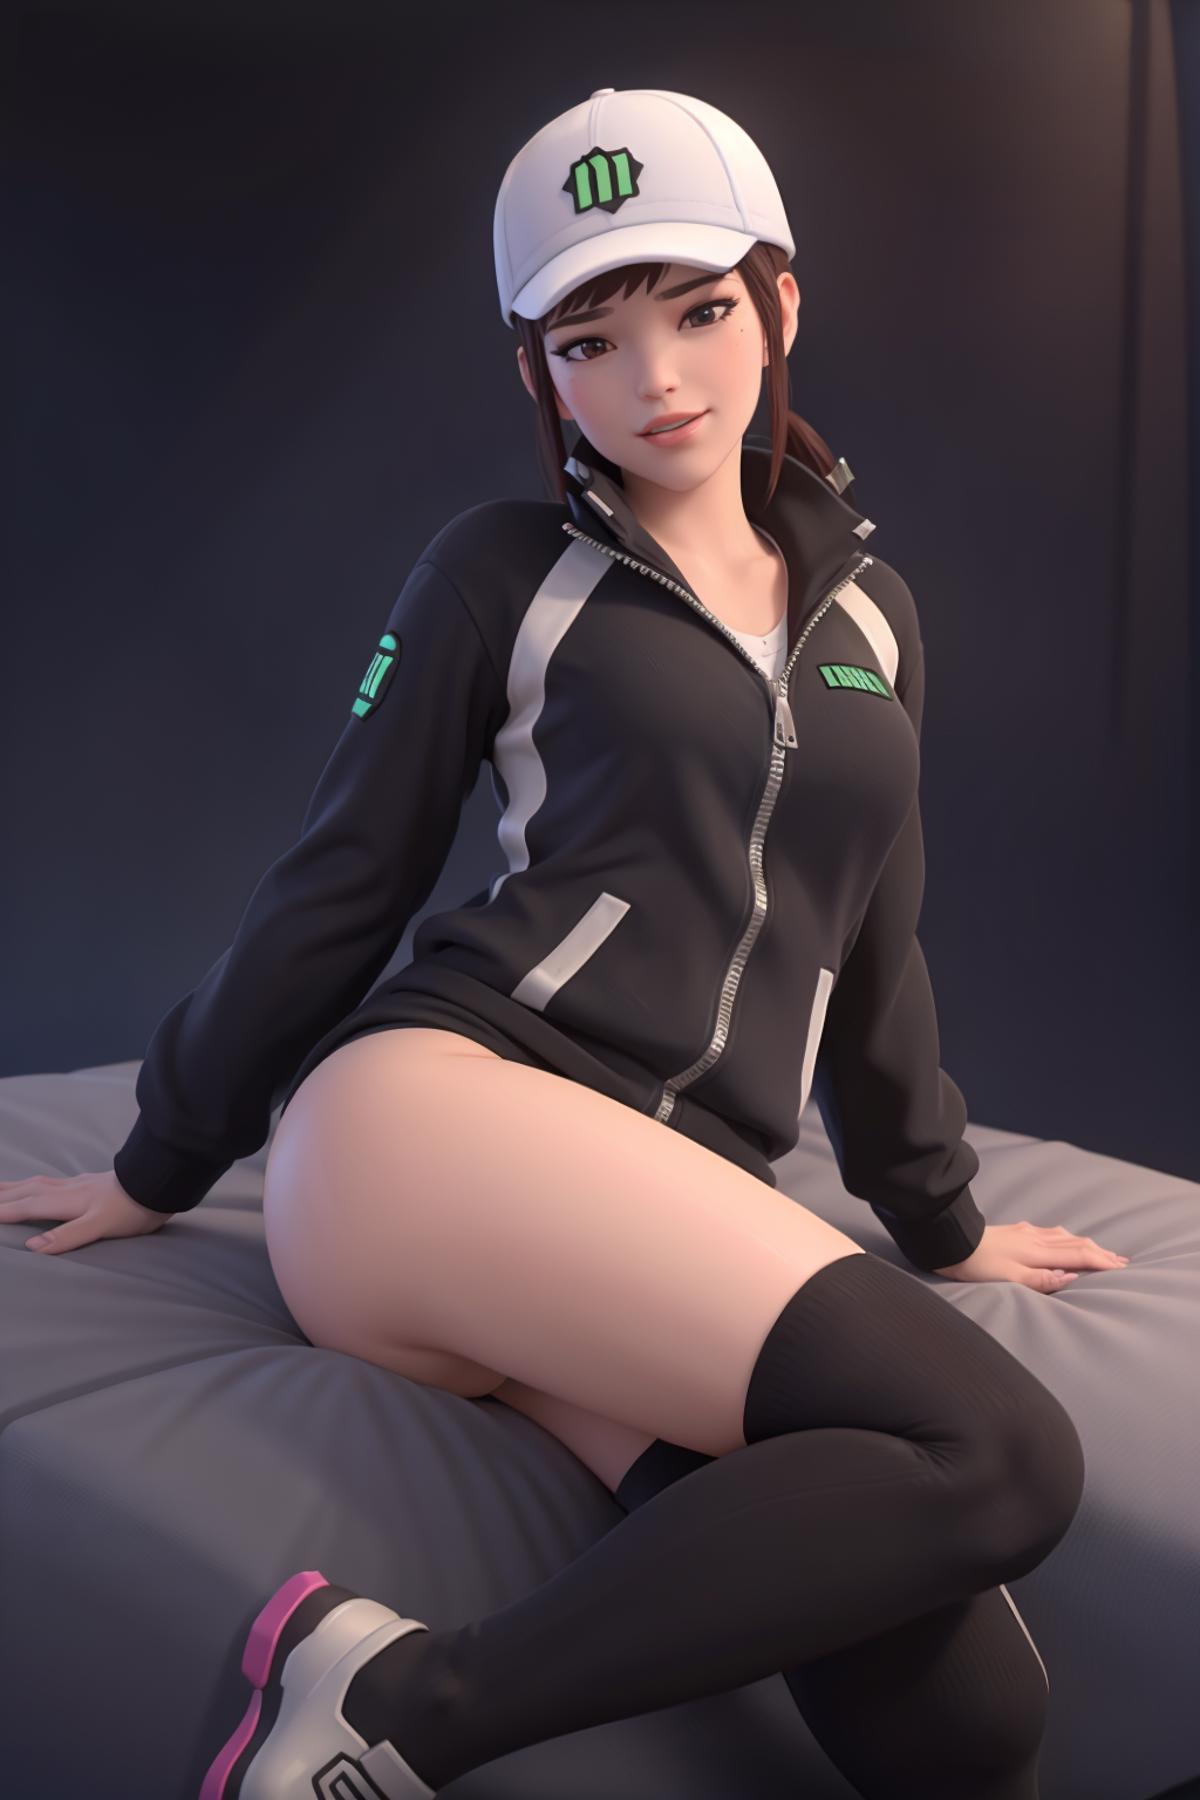 AI model image by shadowrui